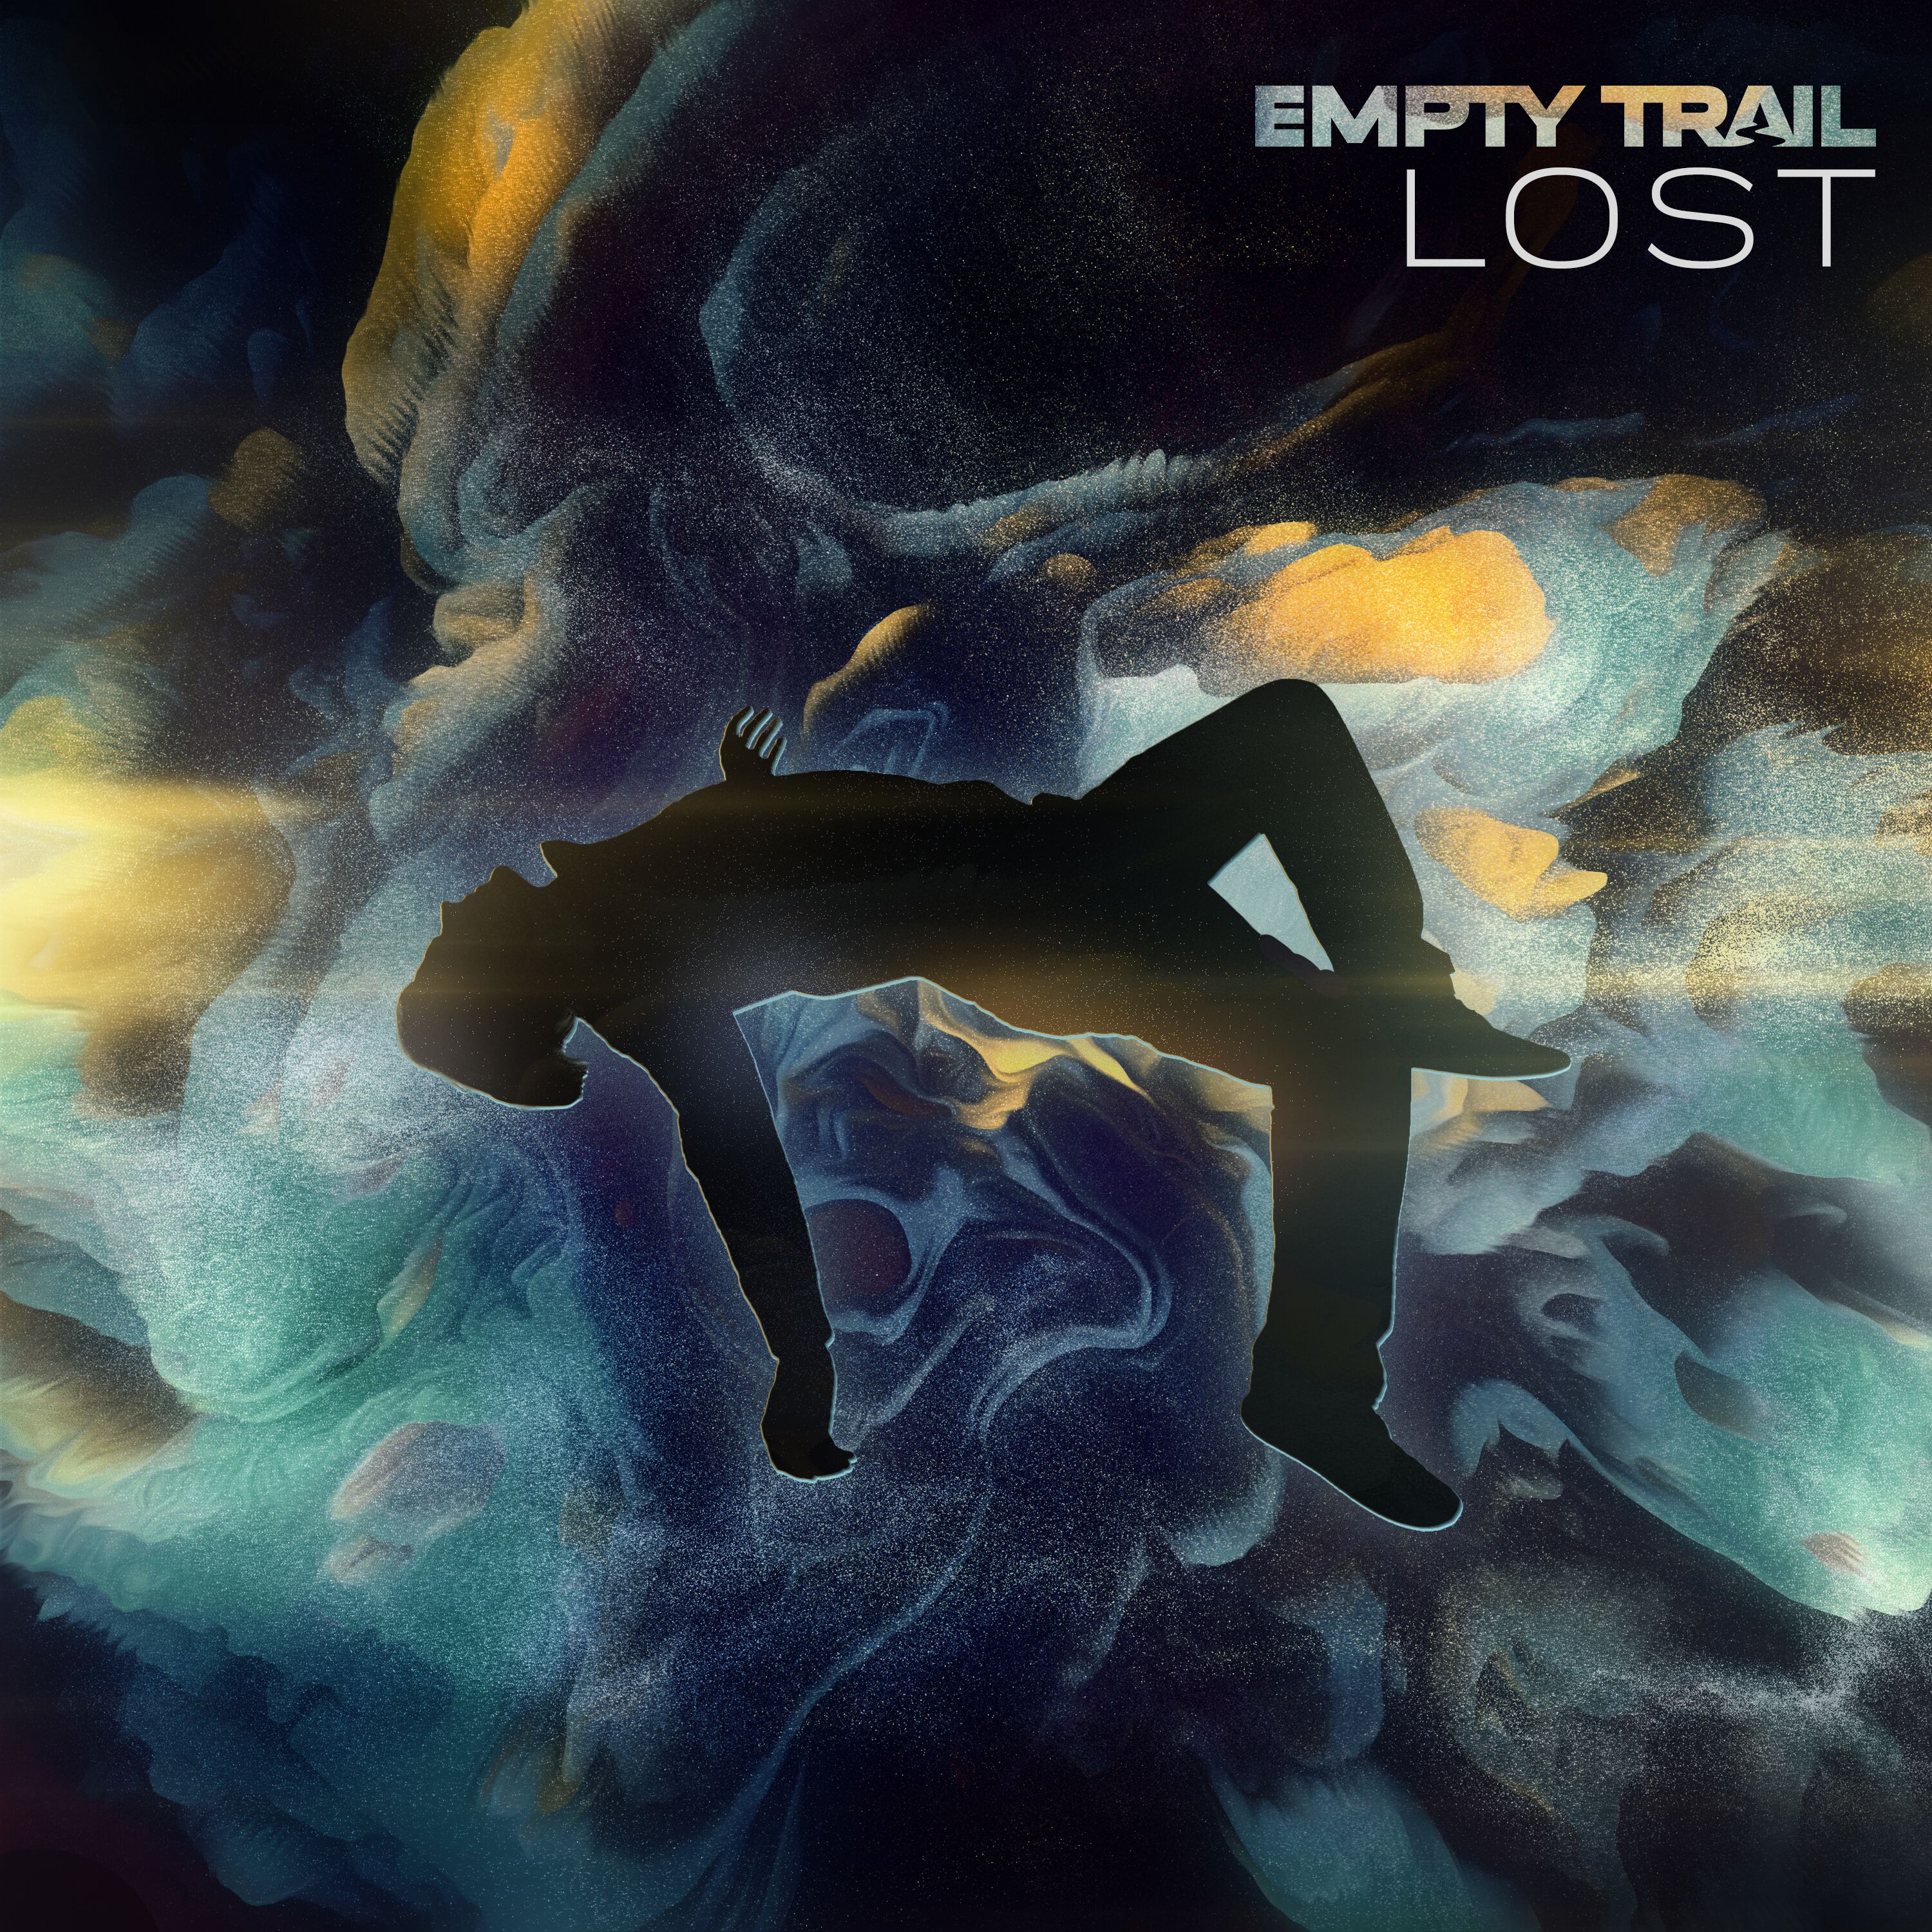 EMPTY TRAIL SET TO RELEASE DEBUT EP, ‘LOST,’ ON OCTOBER 18TH